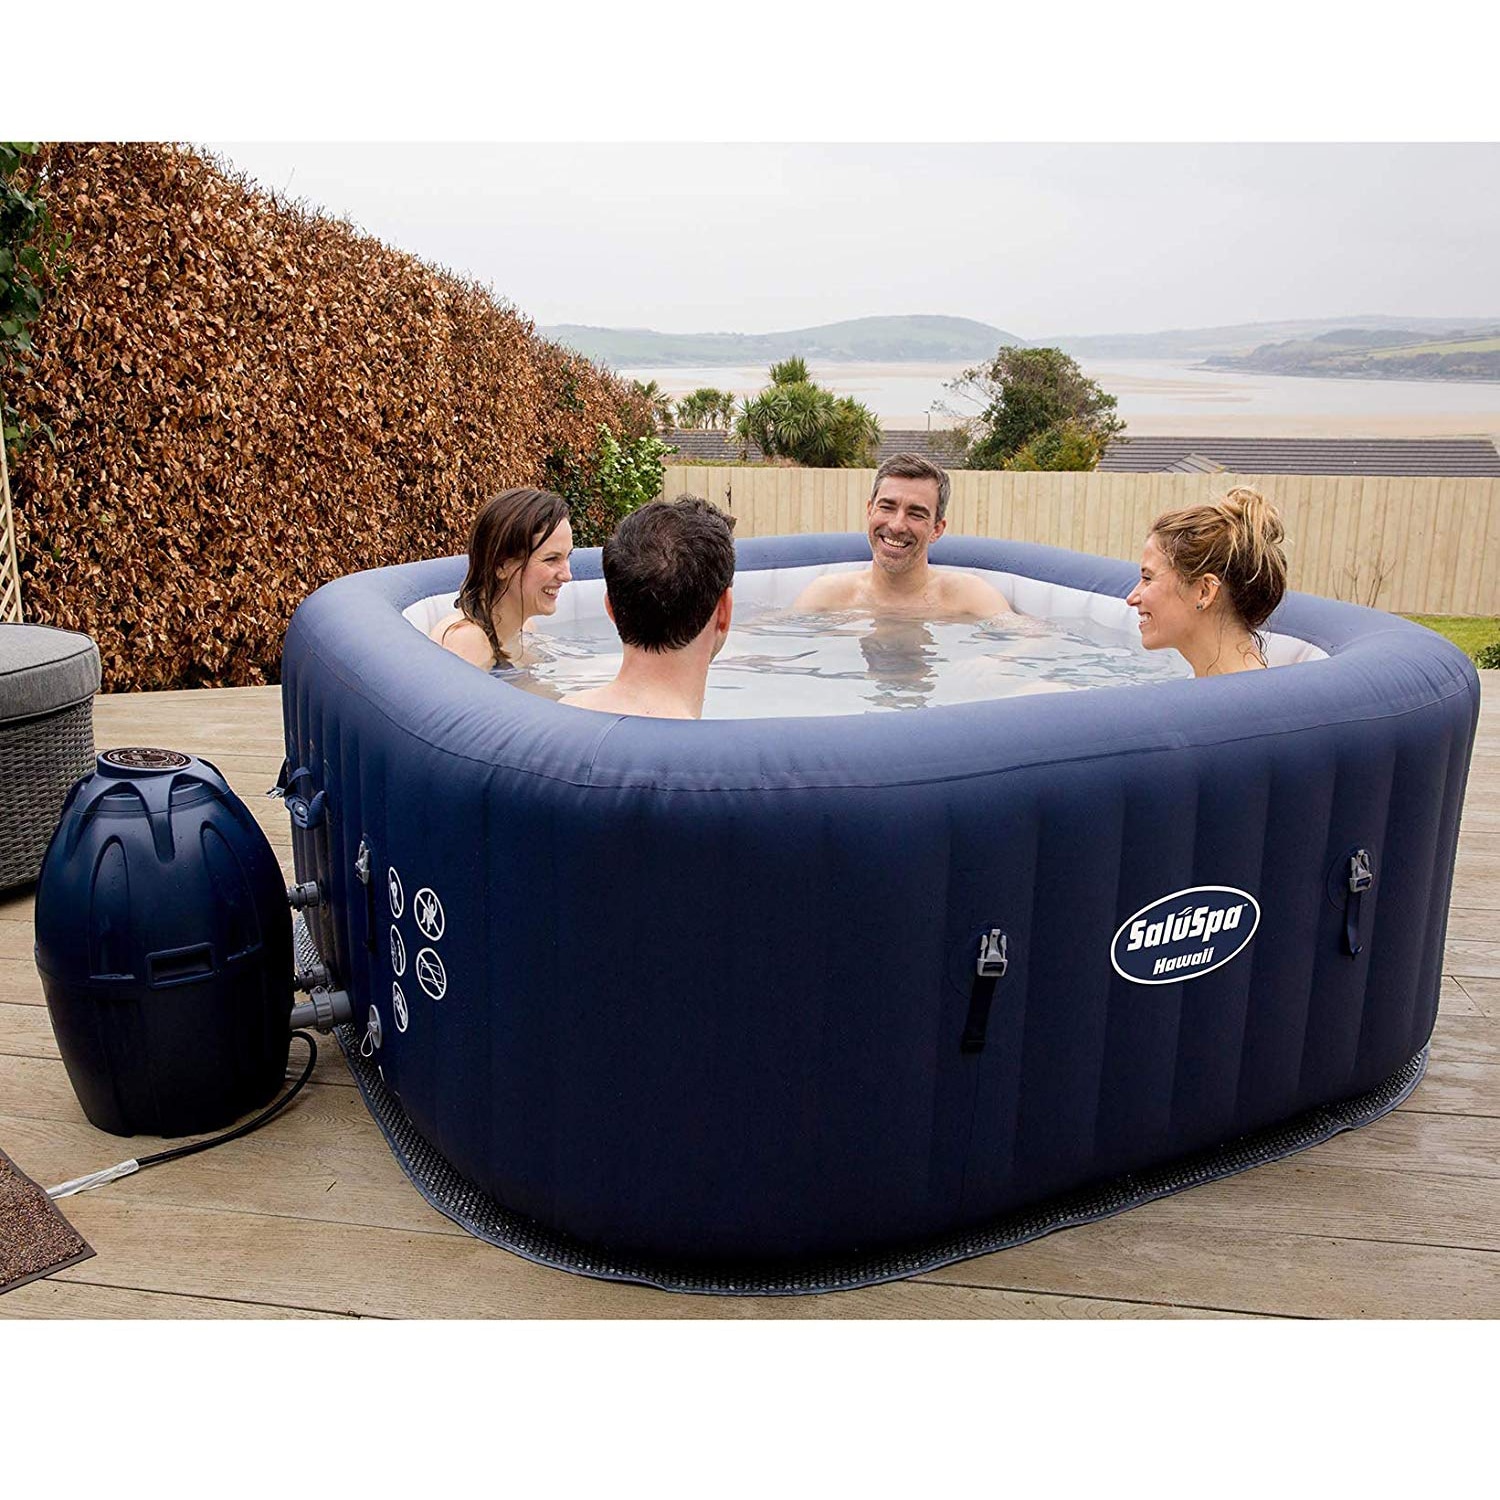 Top 10 Best Portable Spas in 2021 Reviews | Guide